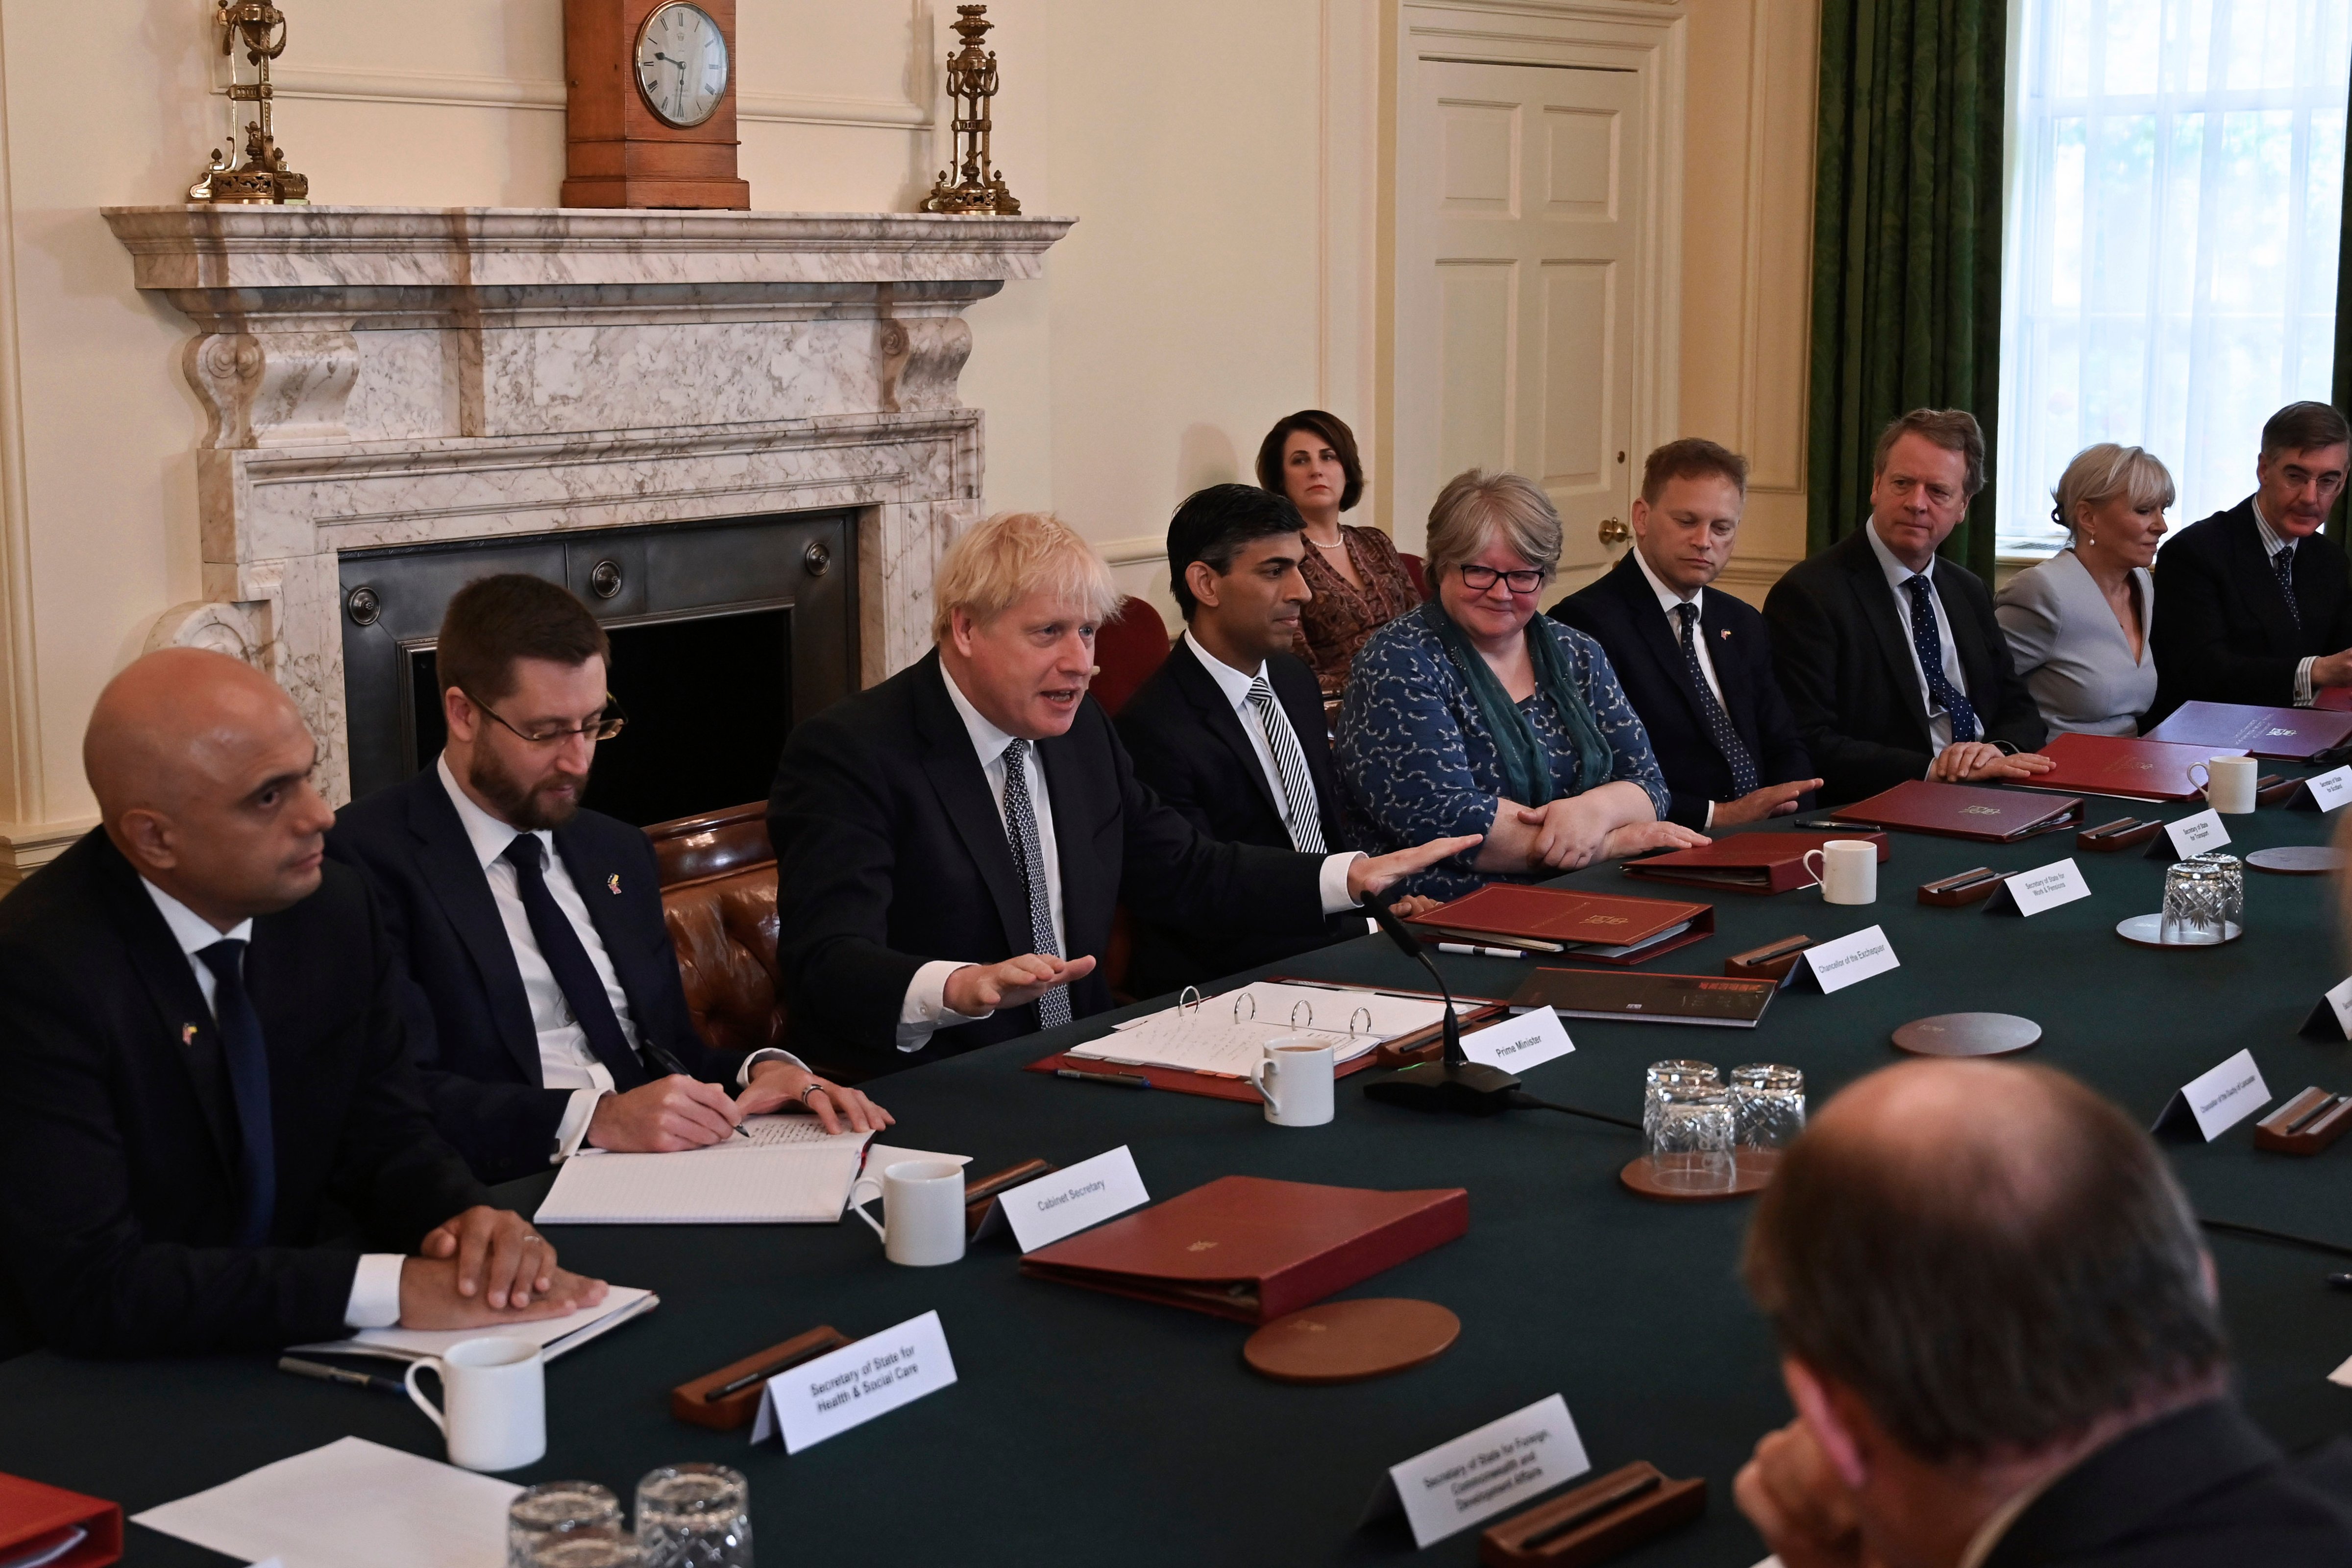 Britain's Prime Minister Boris Johnson, centre, speaks at the start of a cabinet meeting in Downing Street, London on July 5, 2022. (Justin Tallis—Pool/AP)